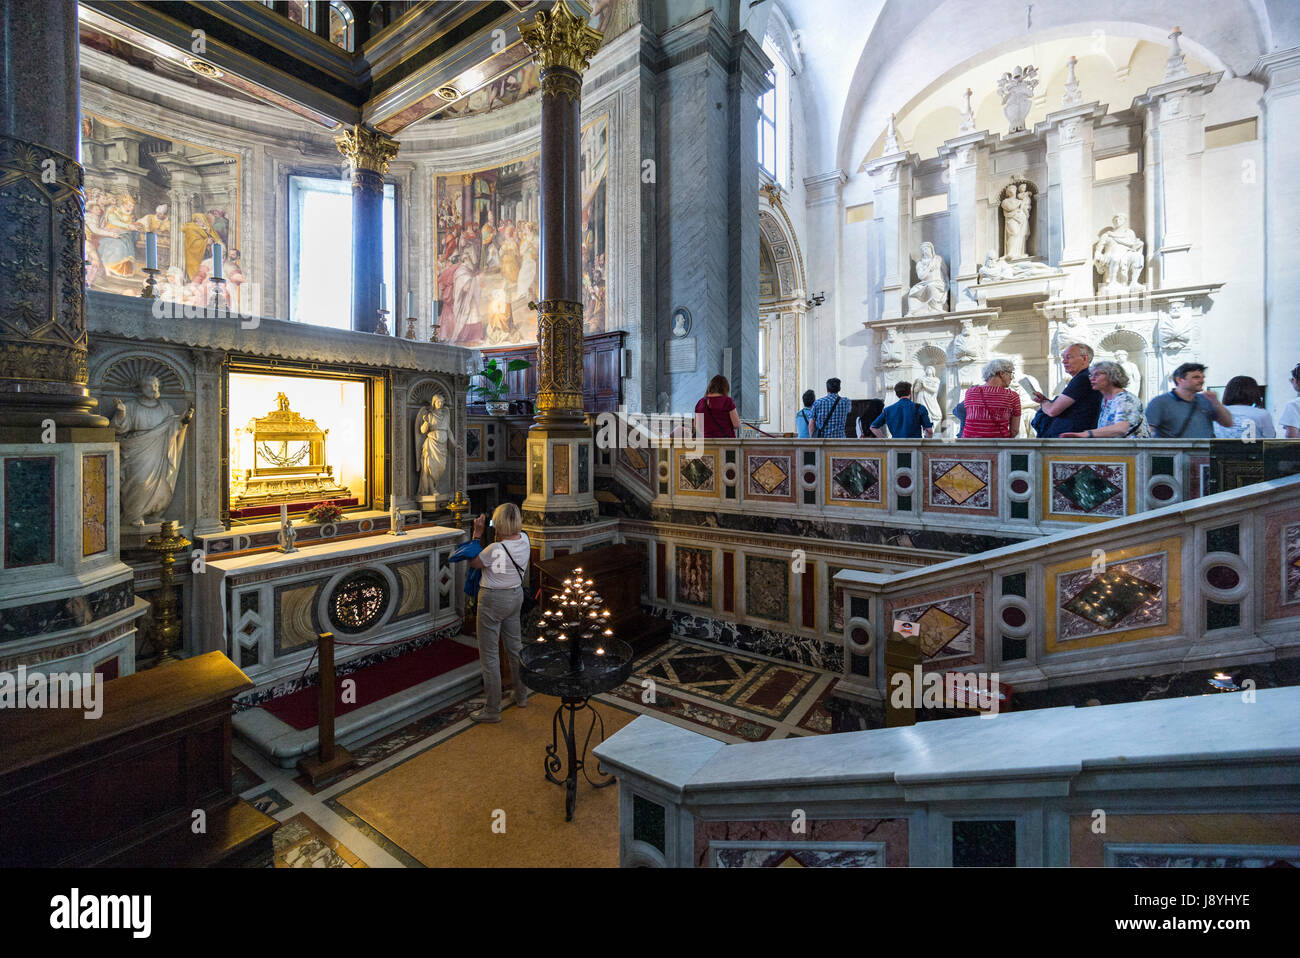 Rome. Italy. Visitors flock to the Basilica di San Pietro in Vincoli, to see Michelangelo's Tomb of Pope Julius II and the chains of St Peter. Stock Photo